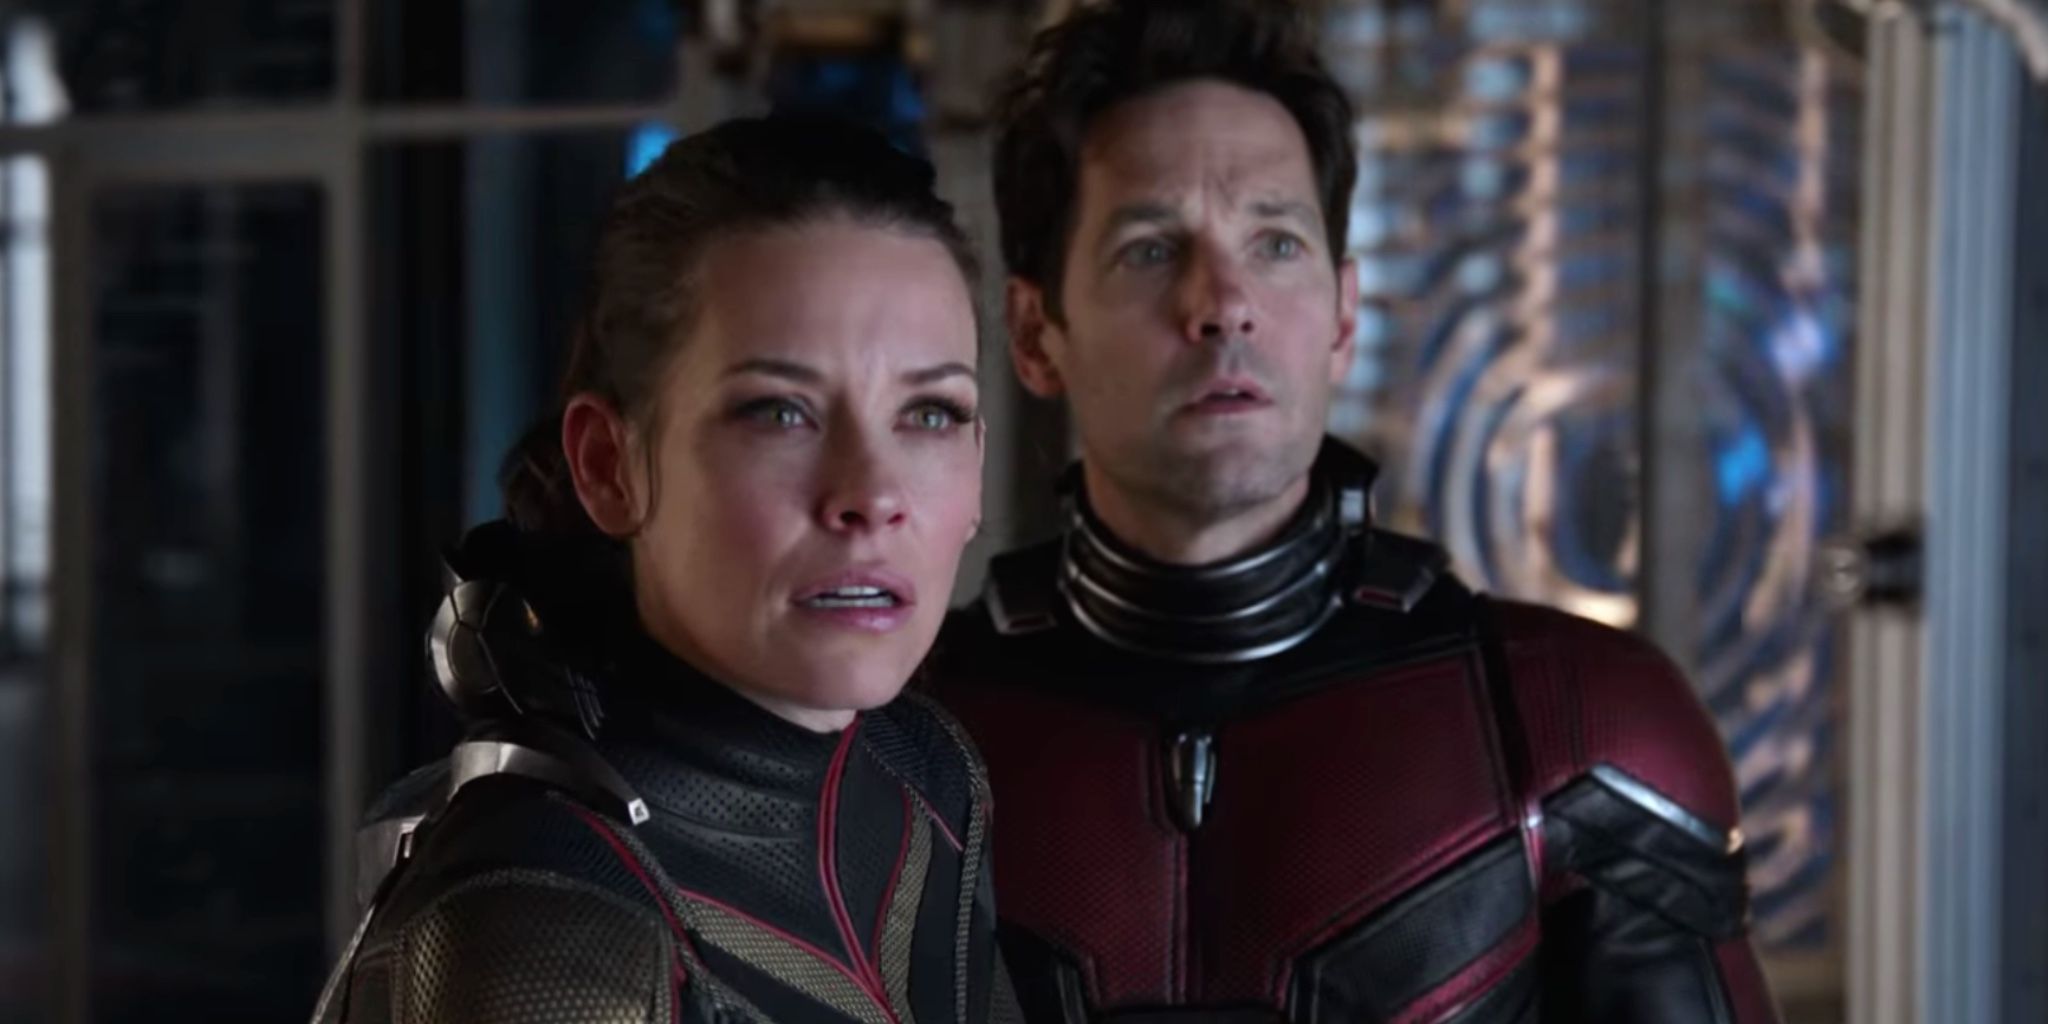 Paul Rudd and Evangeline Lilly as Ant-Man and Wasp, Ant-Man and the Wasp